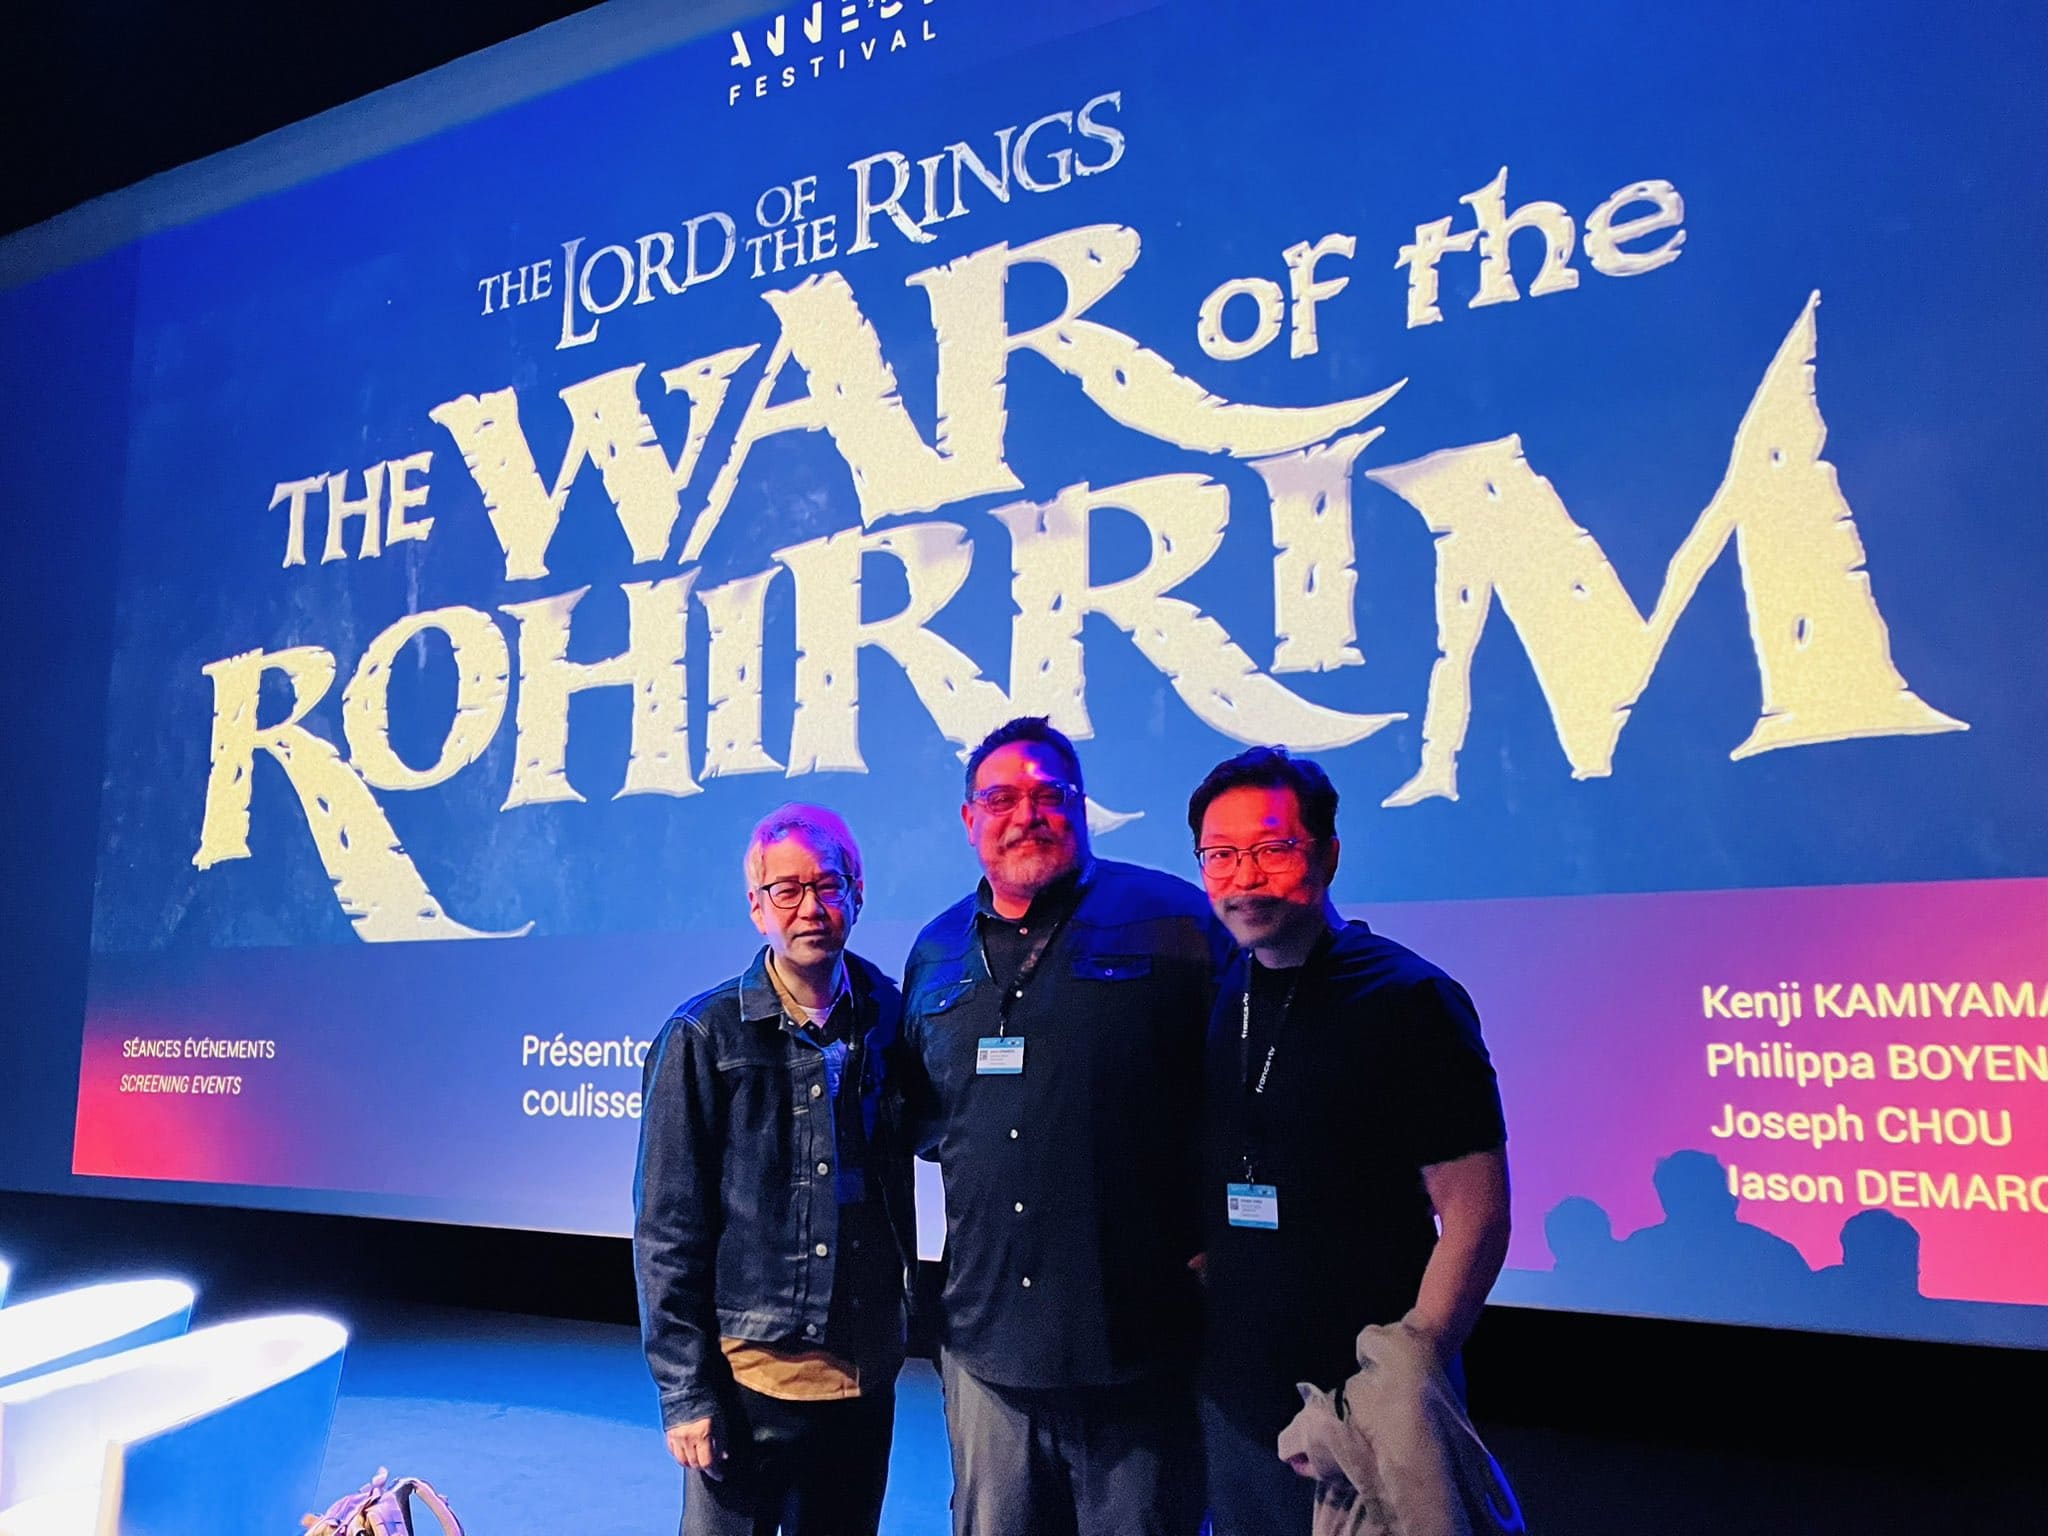 The Lord of the Rings Anime War of the Rohirrim Set for December Release